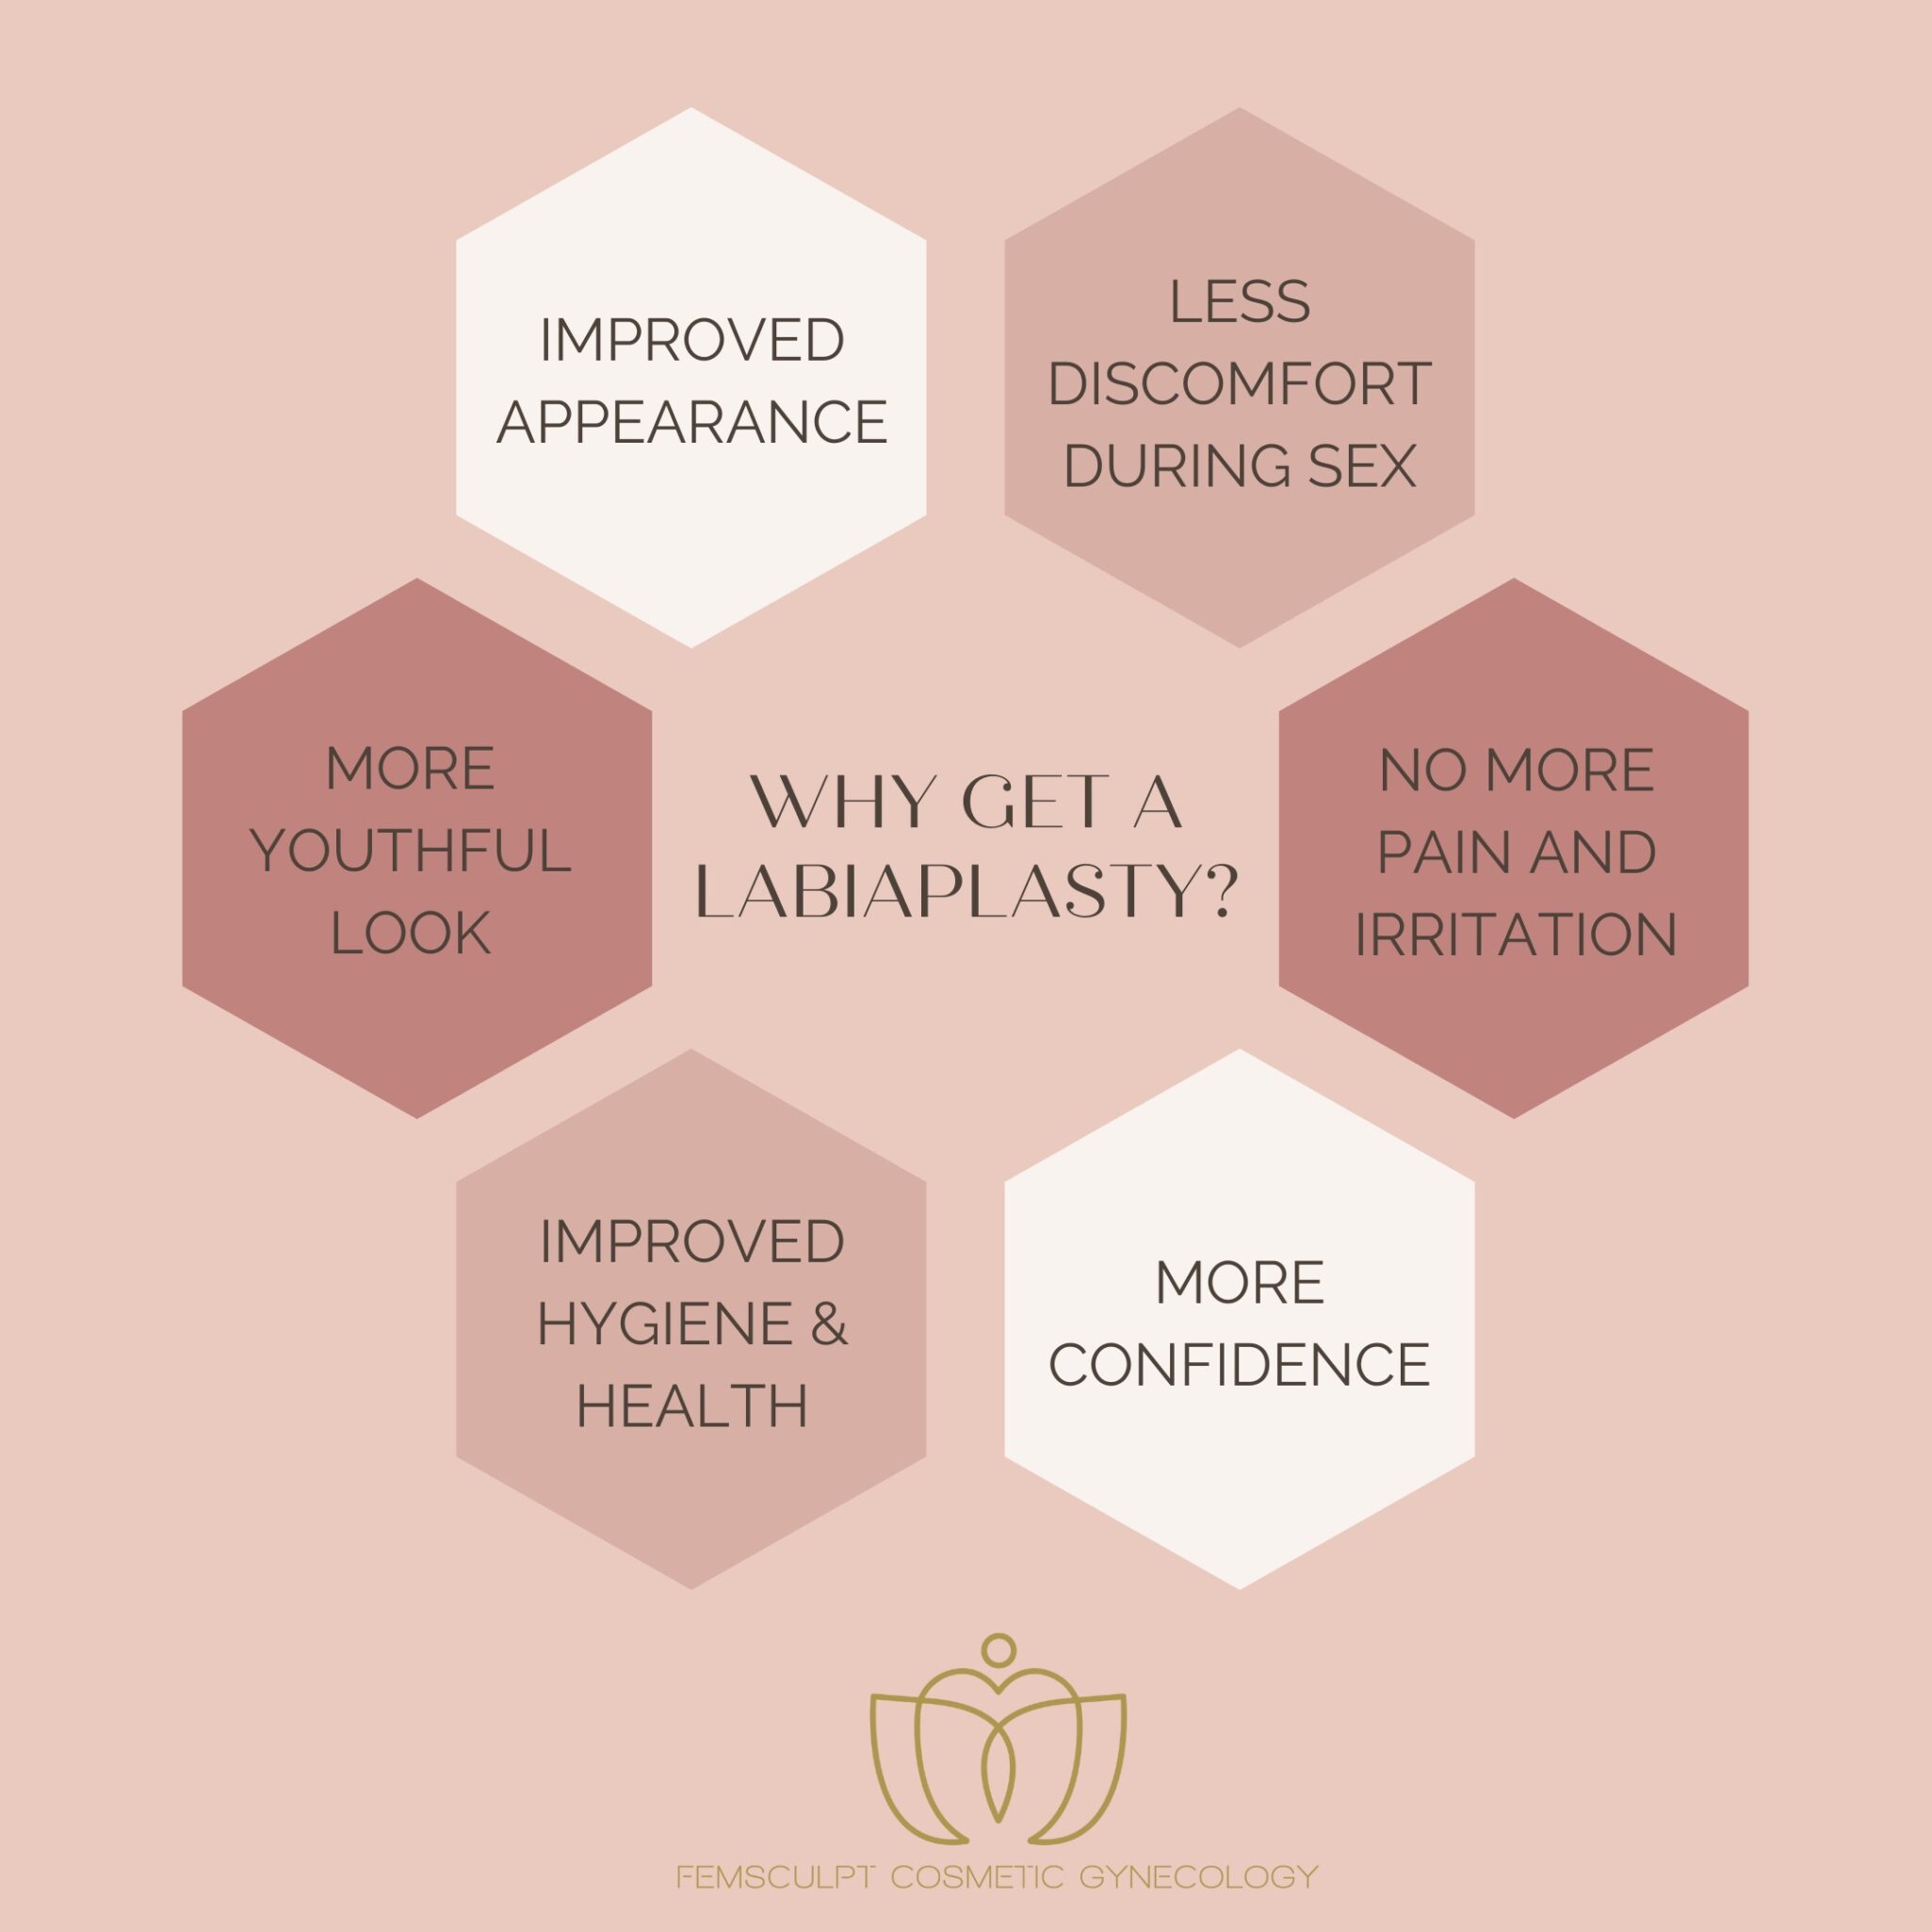 what are the benefits of a labiaplasty